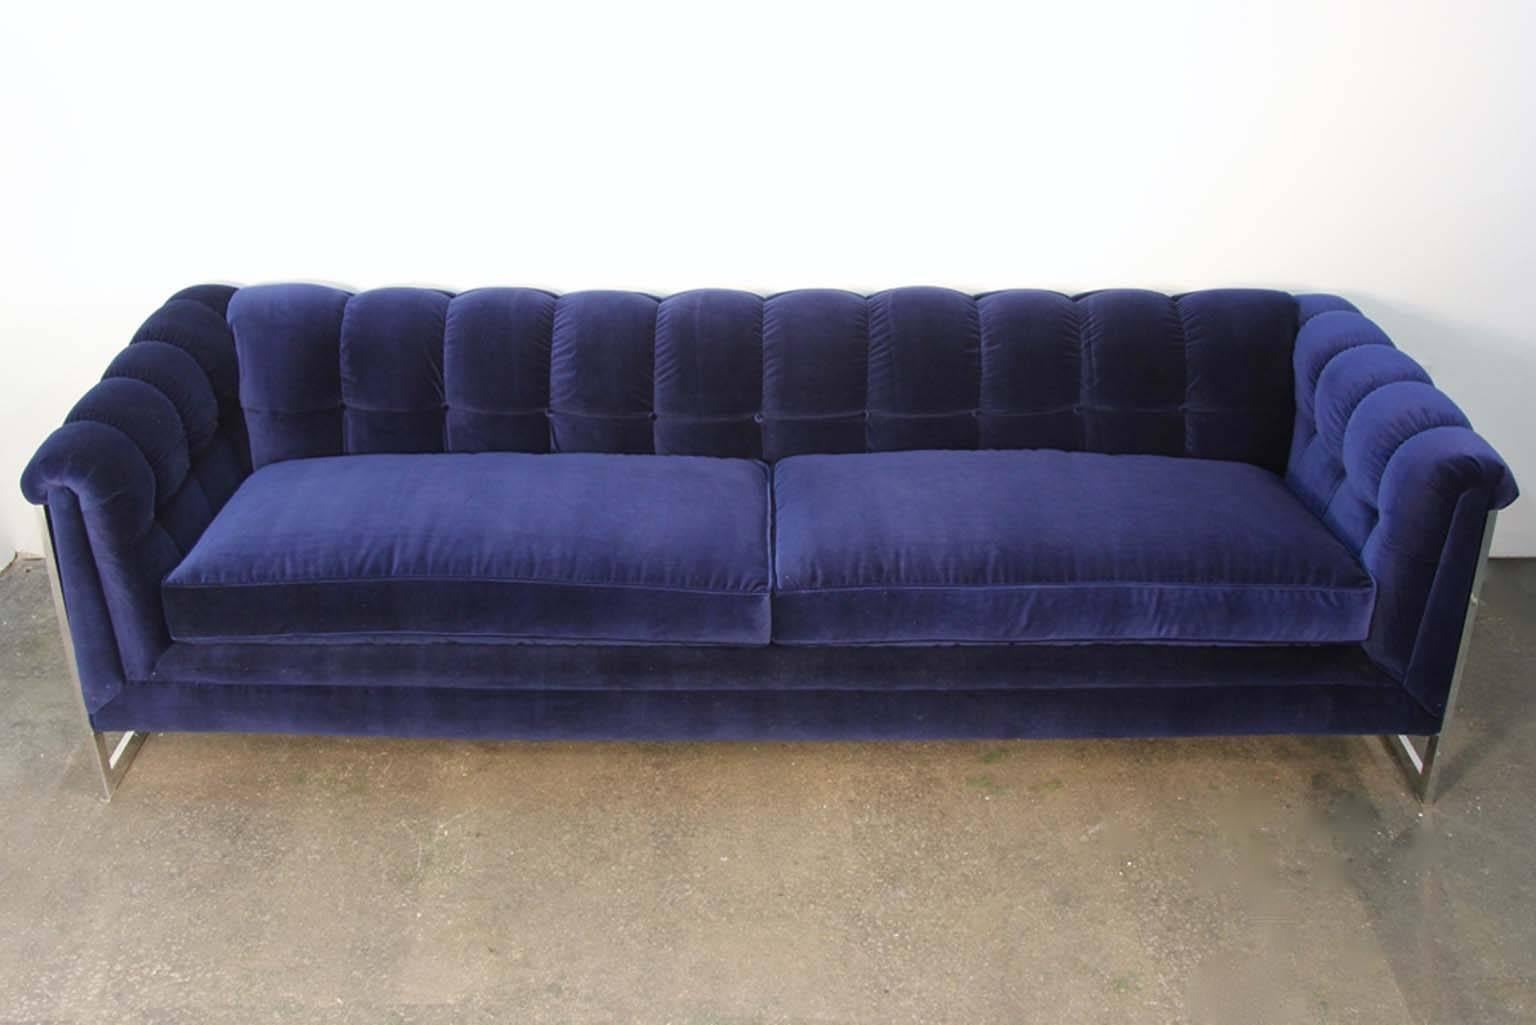 Amazing newly upholstered in navy blue velvet, tufted back, chrome frame sofa. Originally by Town Mix collection, this sofa has been custom modified to look amazing. Beautiful navy velvet, clean lines, and amazing style.